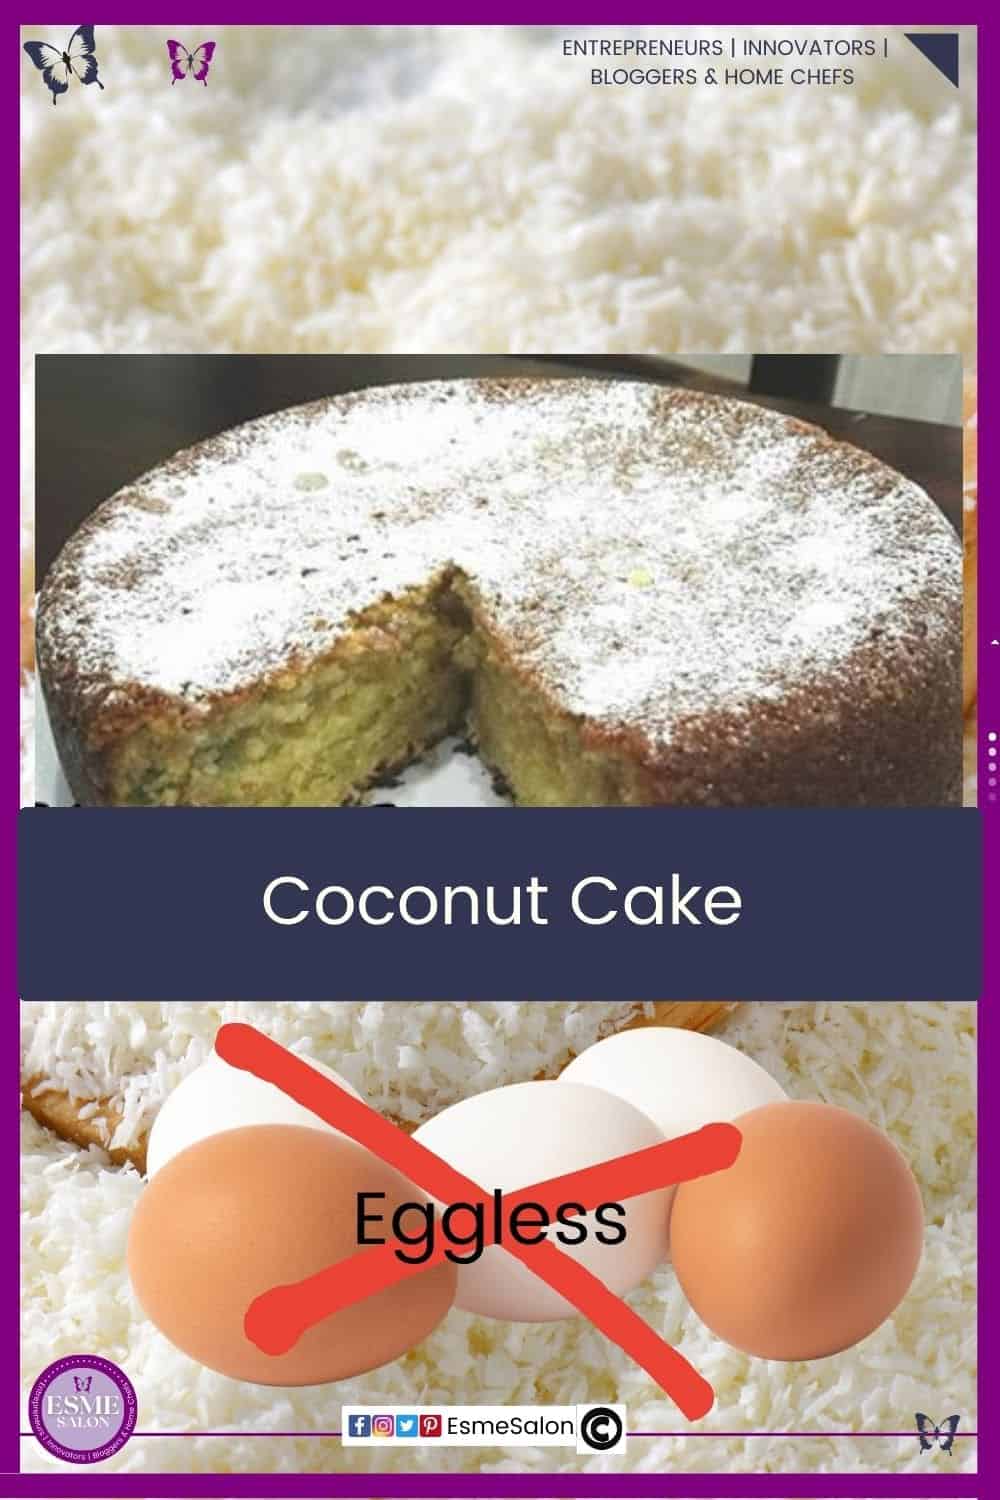 an image of a sliced Eggless Coconut Cake dusted with icing sugar